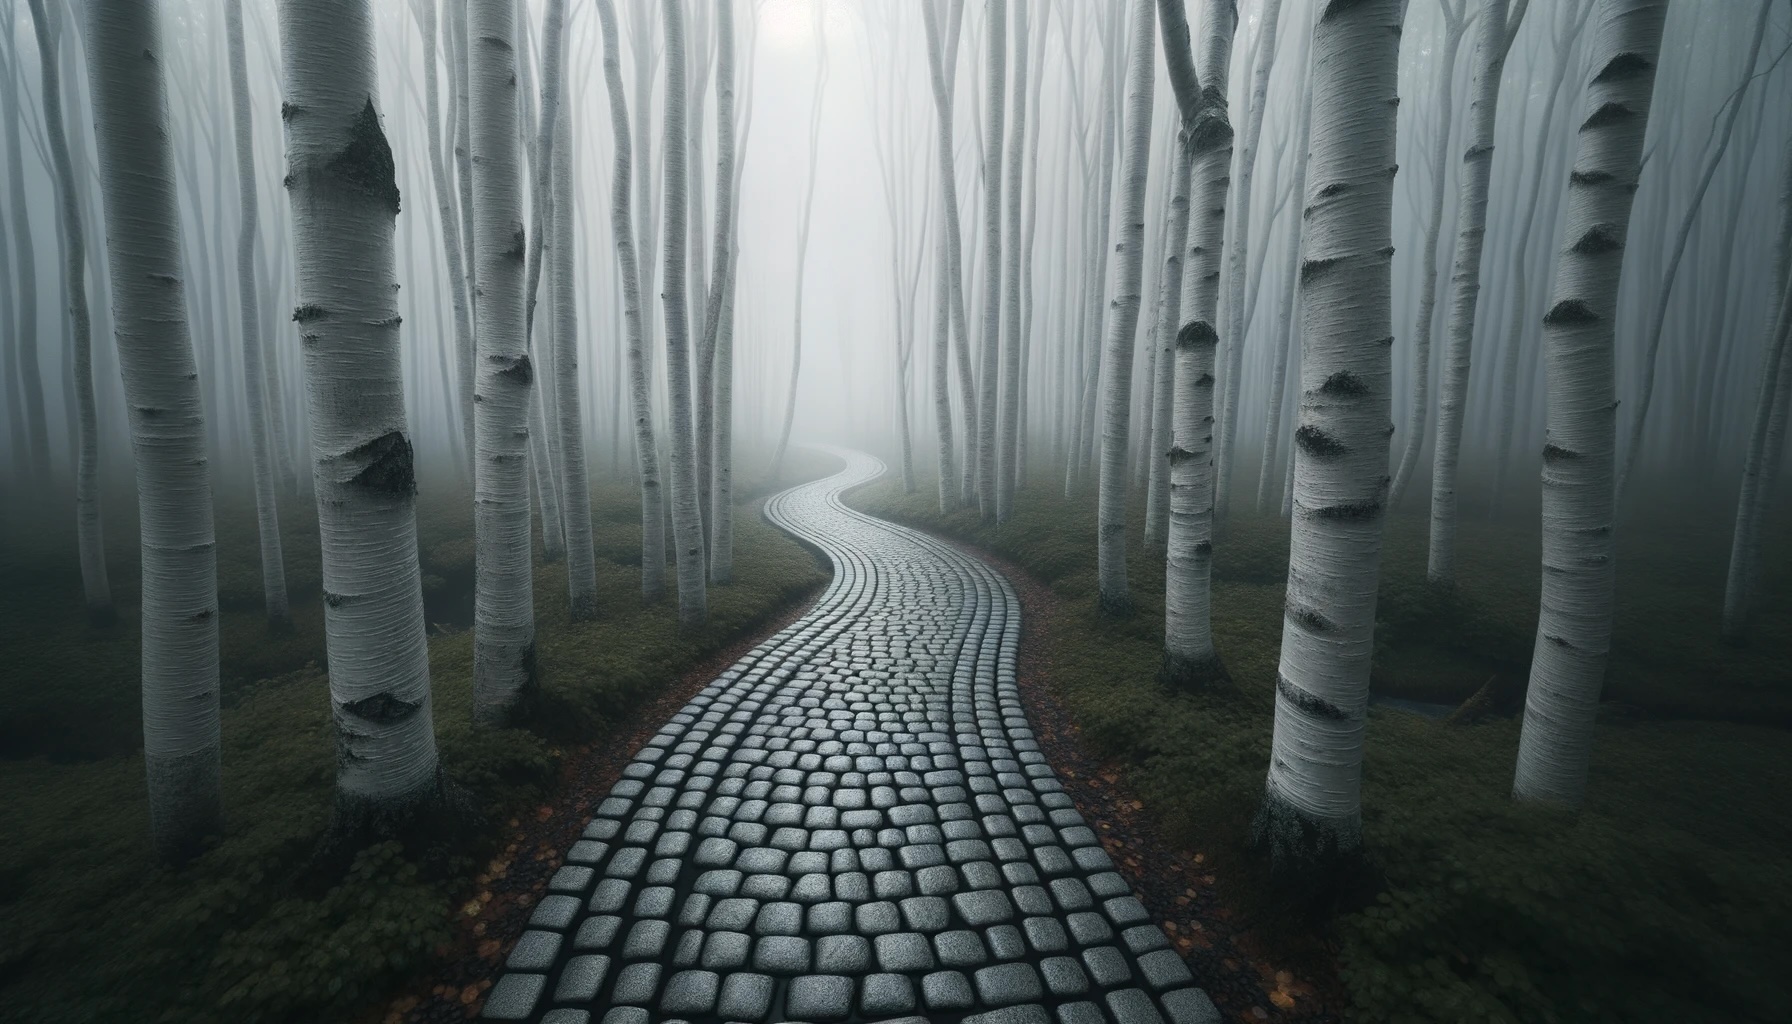 Photo of a narrow, winding path made of grey cobblestones leading through a misty forest. The trees are silver-barked, and the fog obscures the end of the path, representing uncertainty.